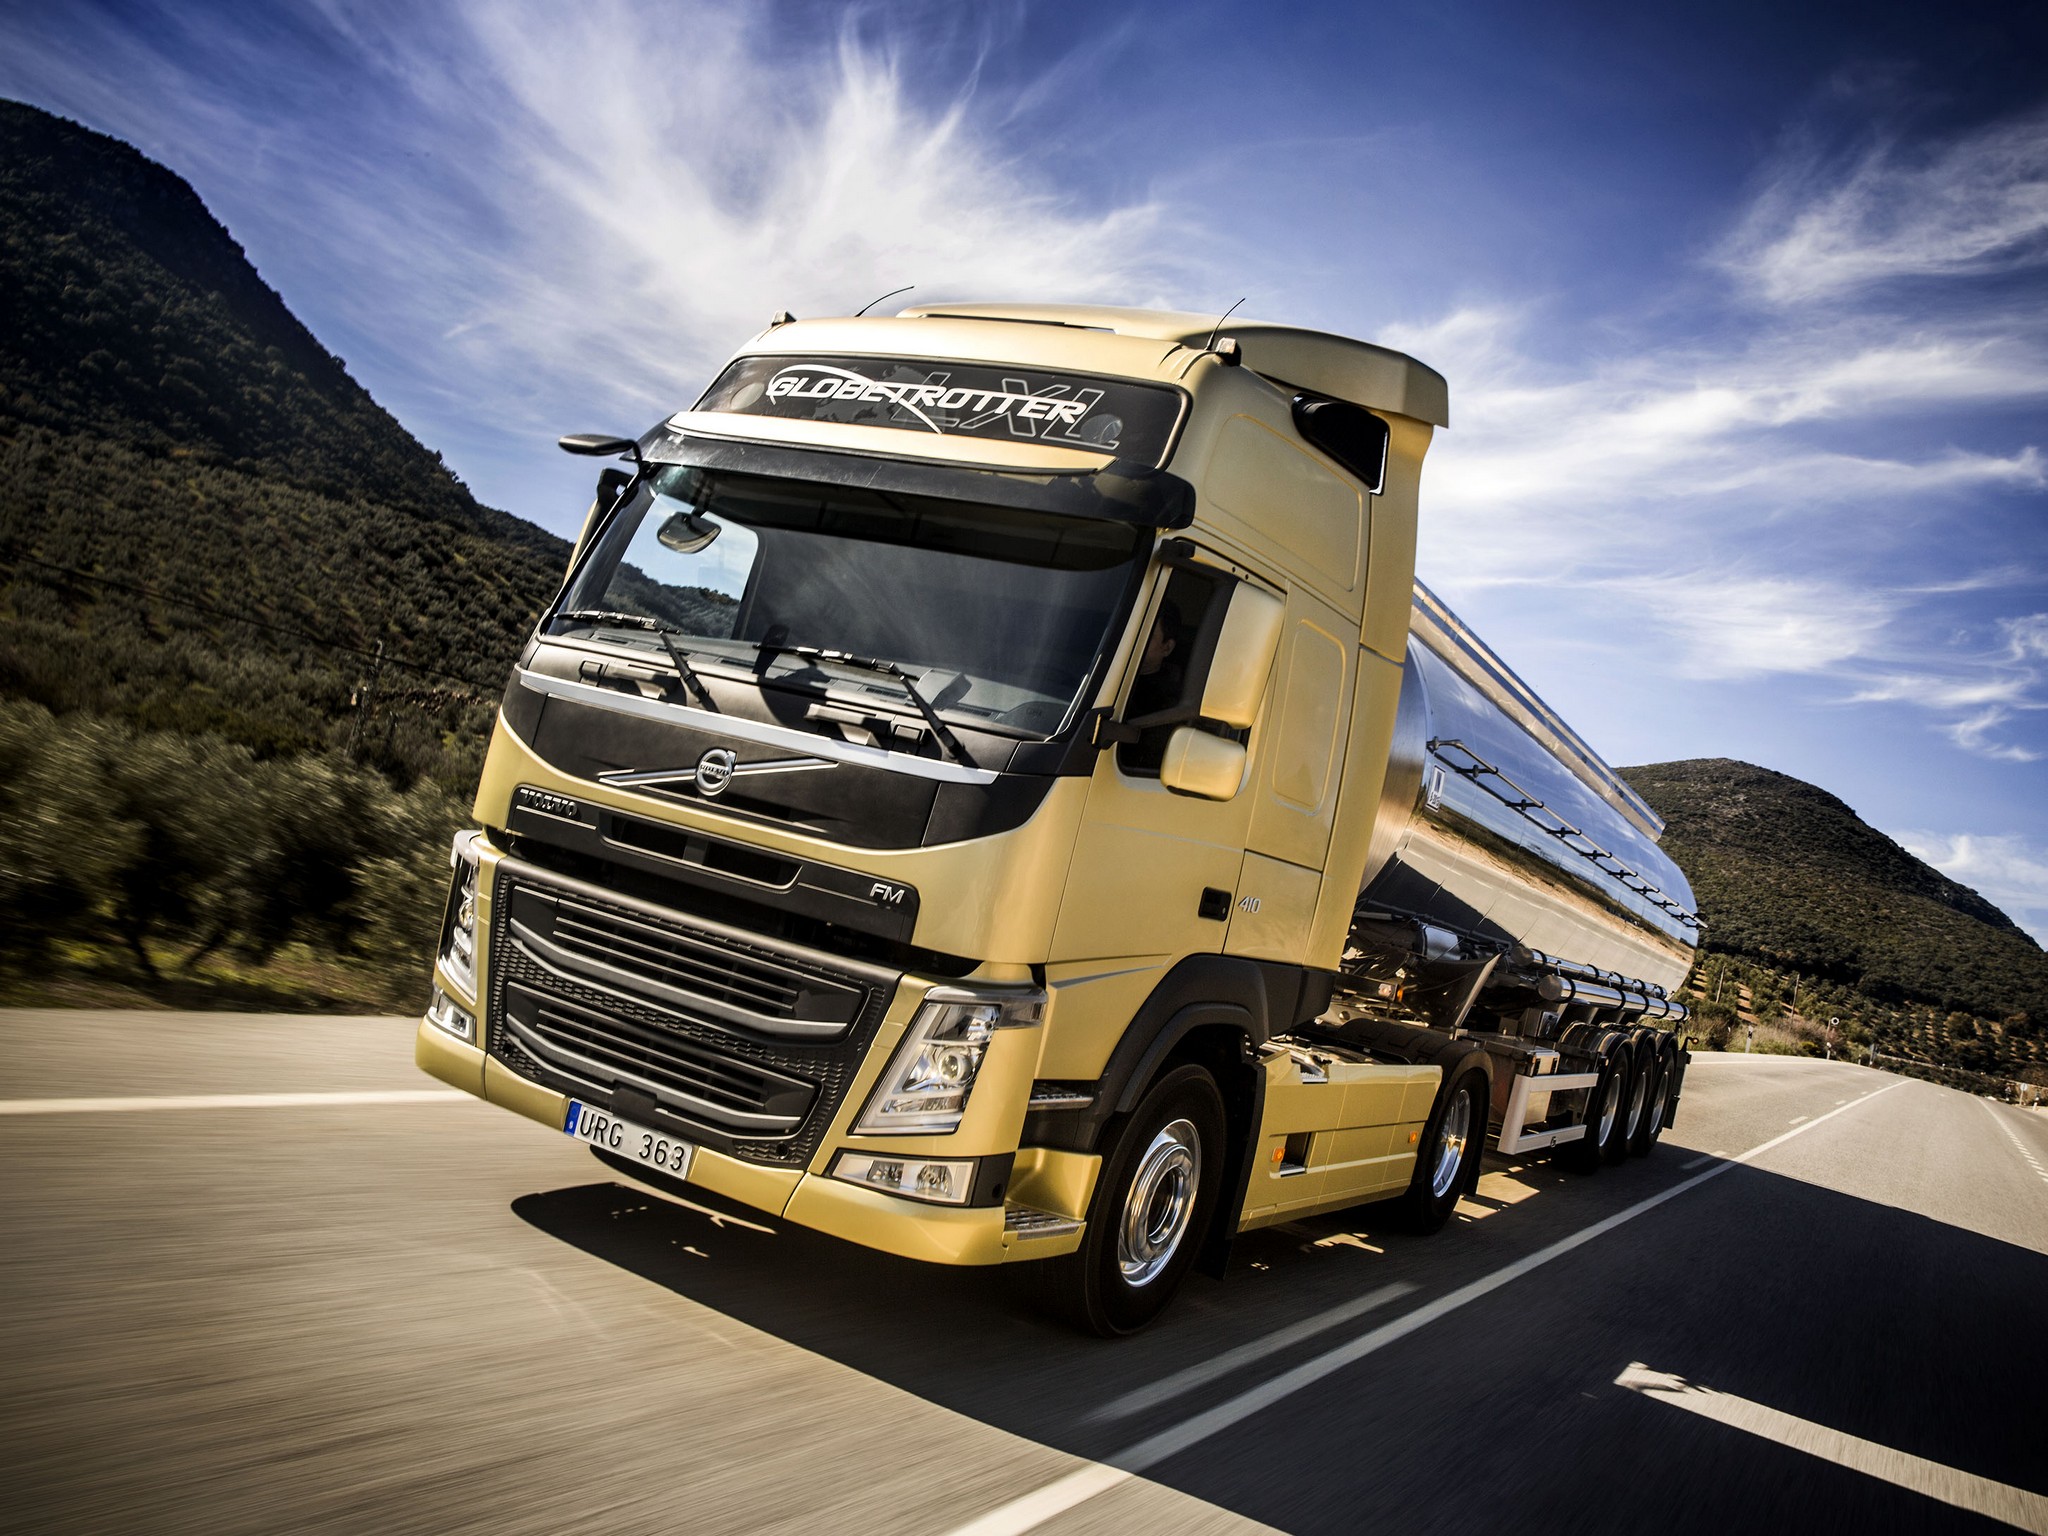 13 Volvo Fm 410 4x2 Semi Tractor F M Wallpapers Hd Desktop And Mobile Backgrounds